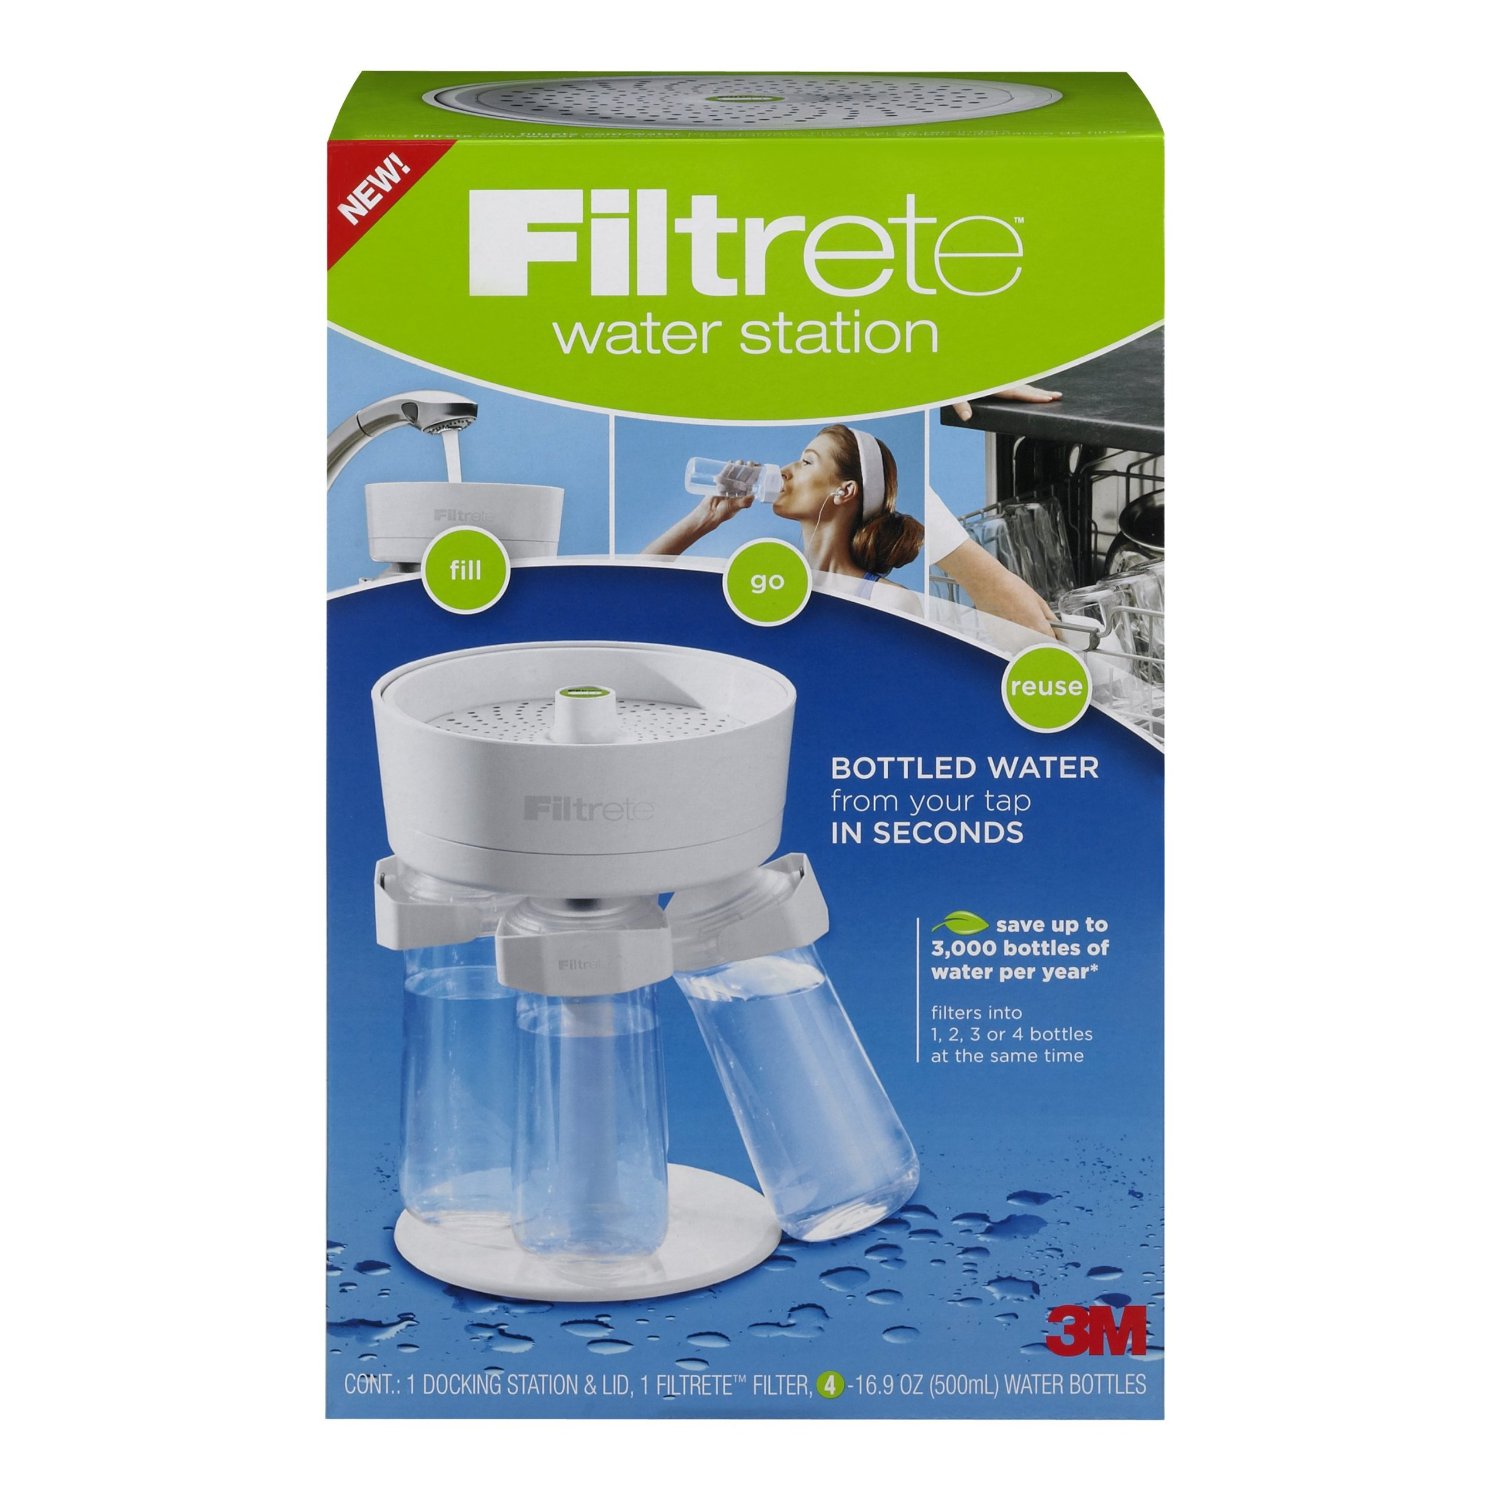 amazon-3m-filtrete-water-station-14-99-after-mail-in-rebate